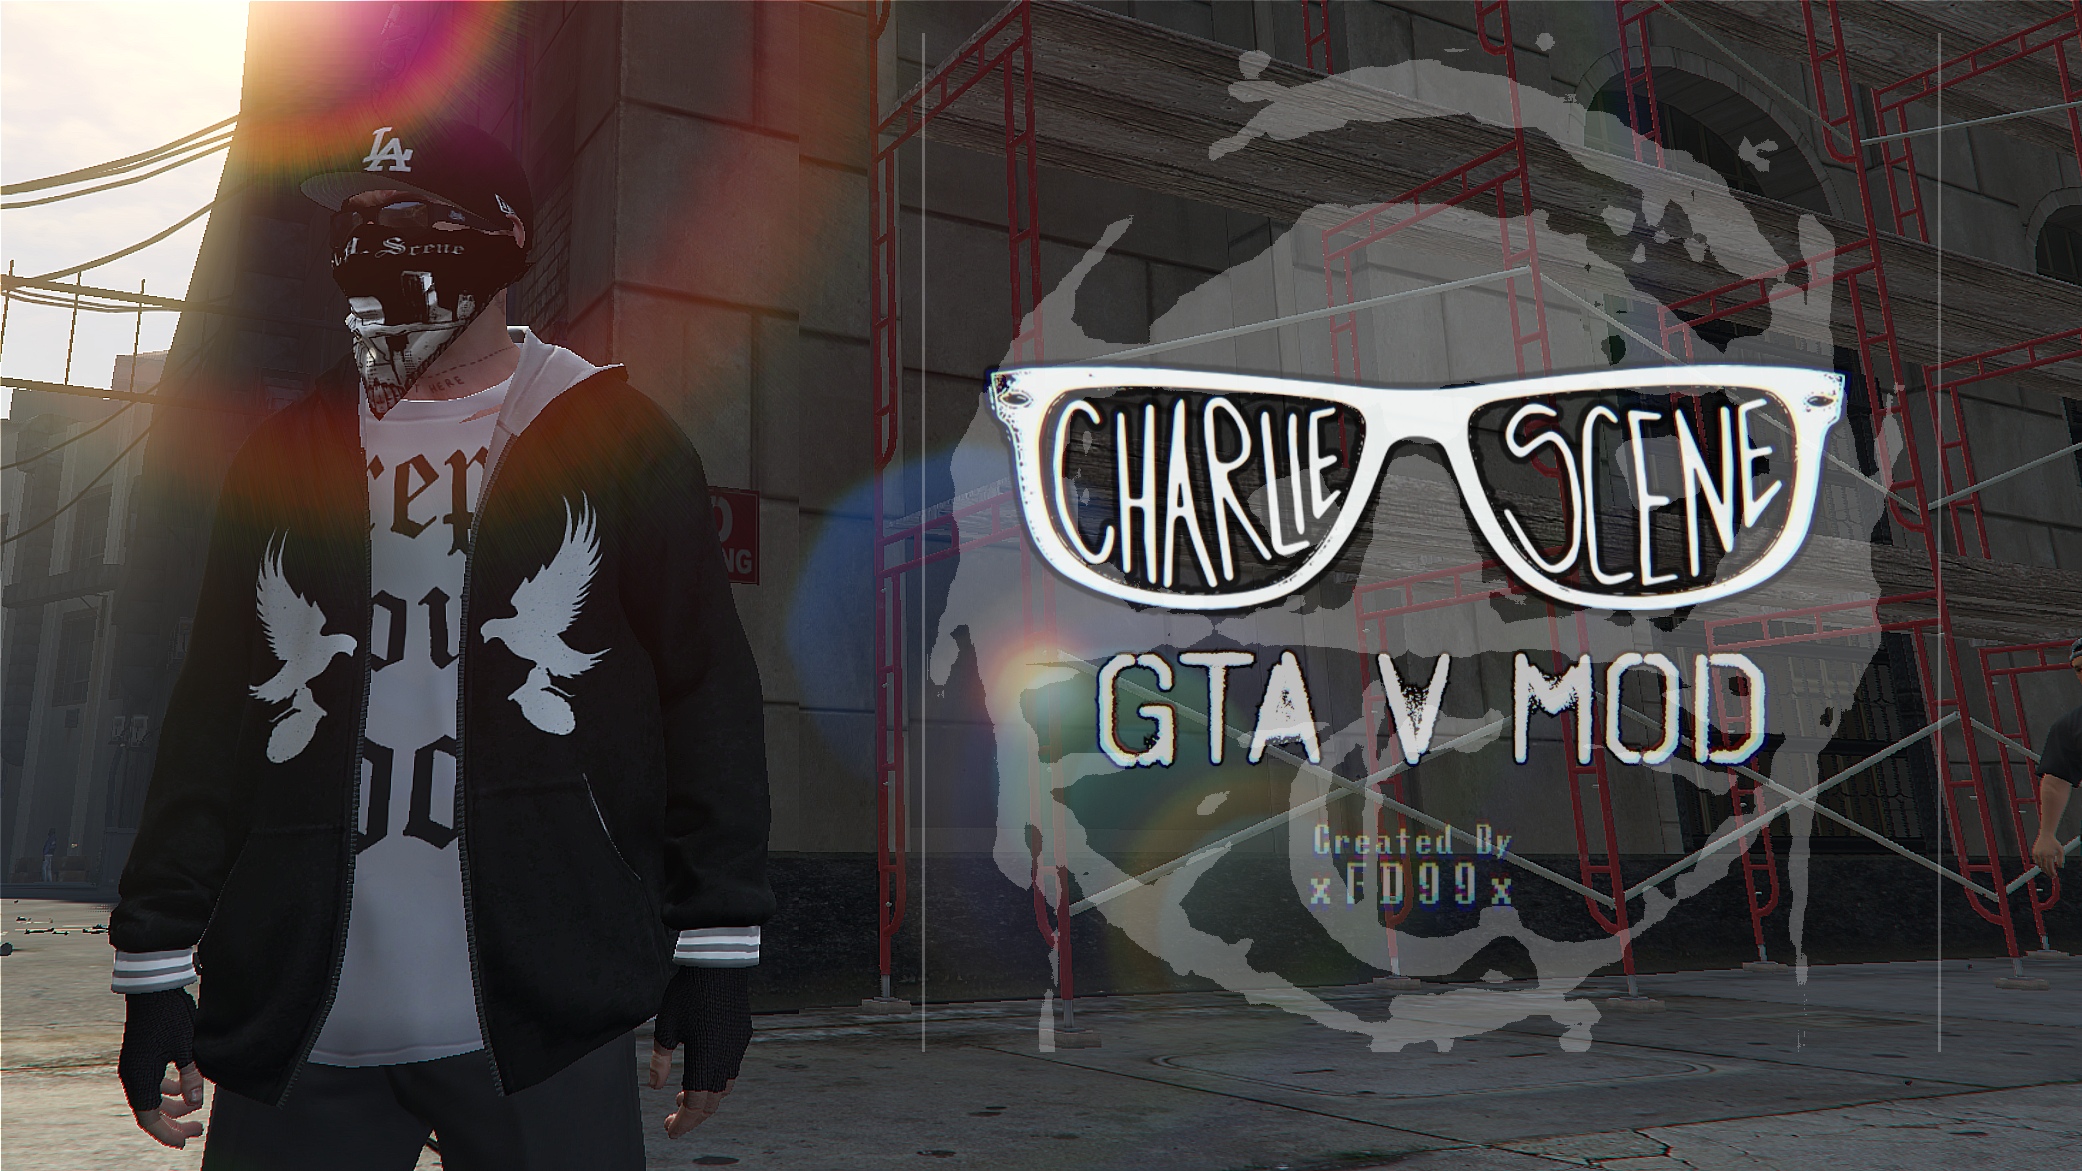 Gta 5 modded outfit фото 78